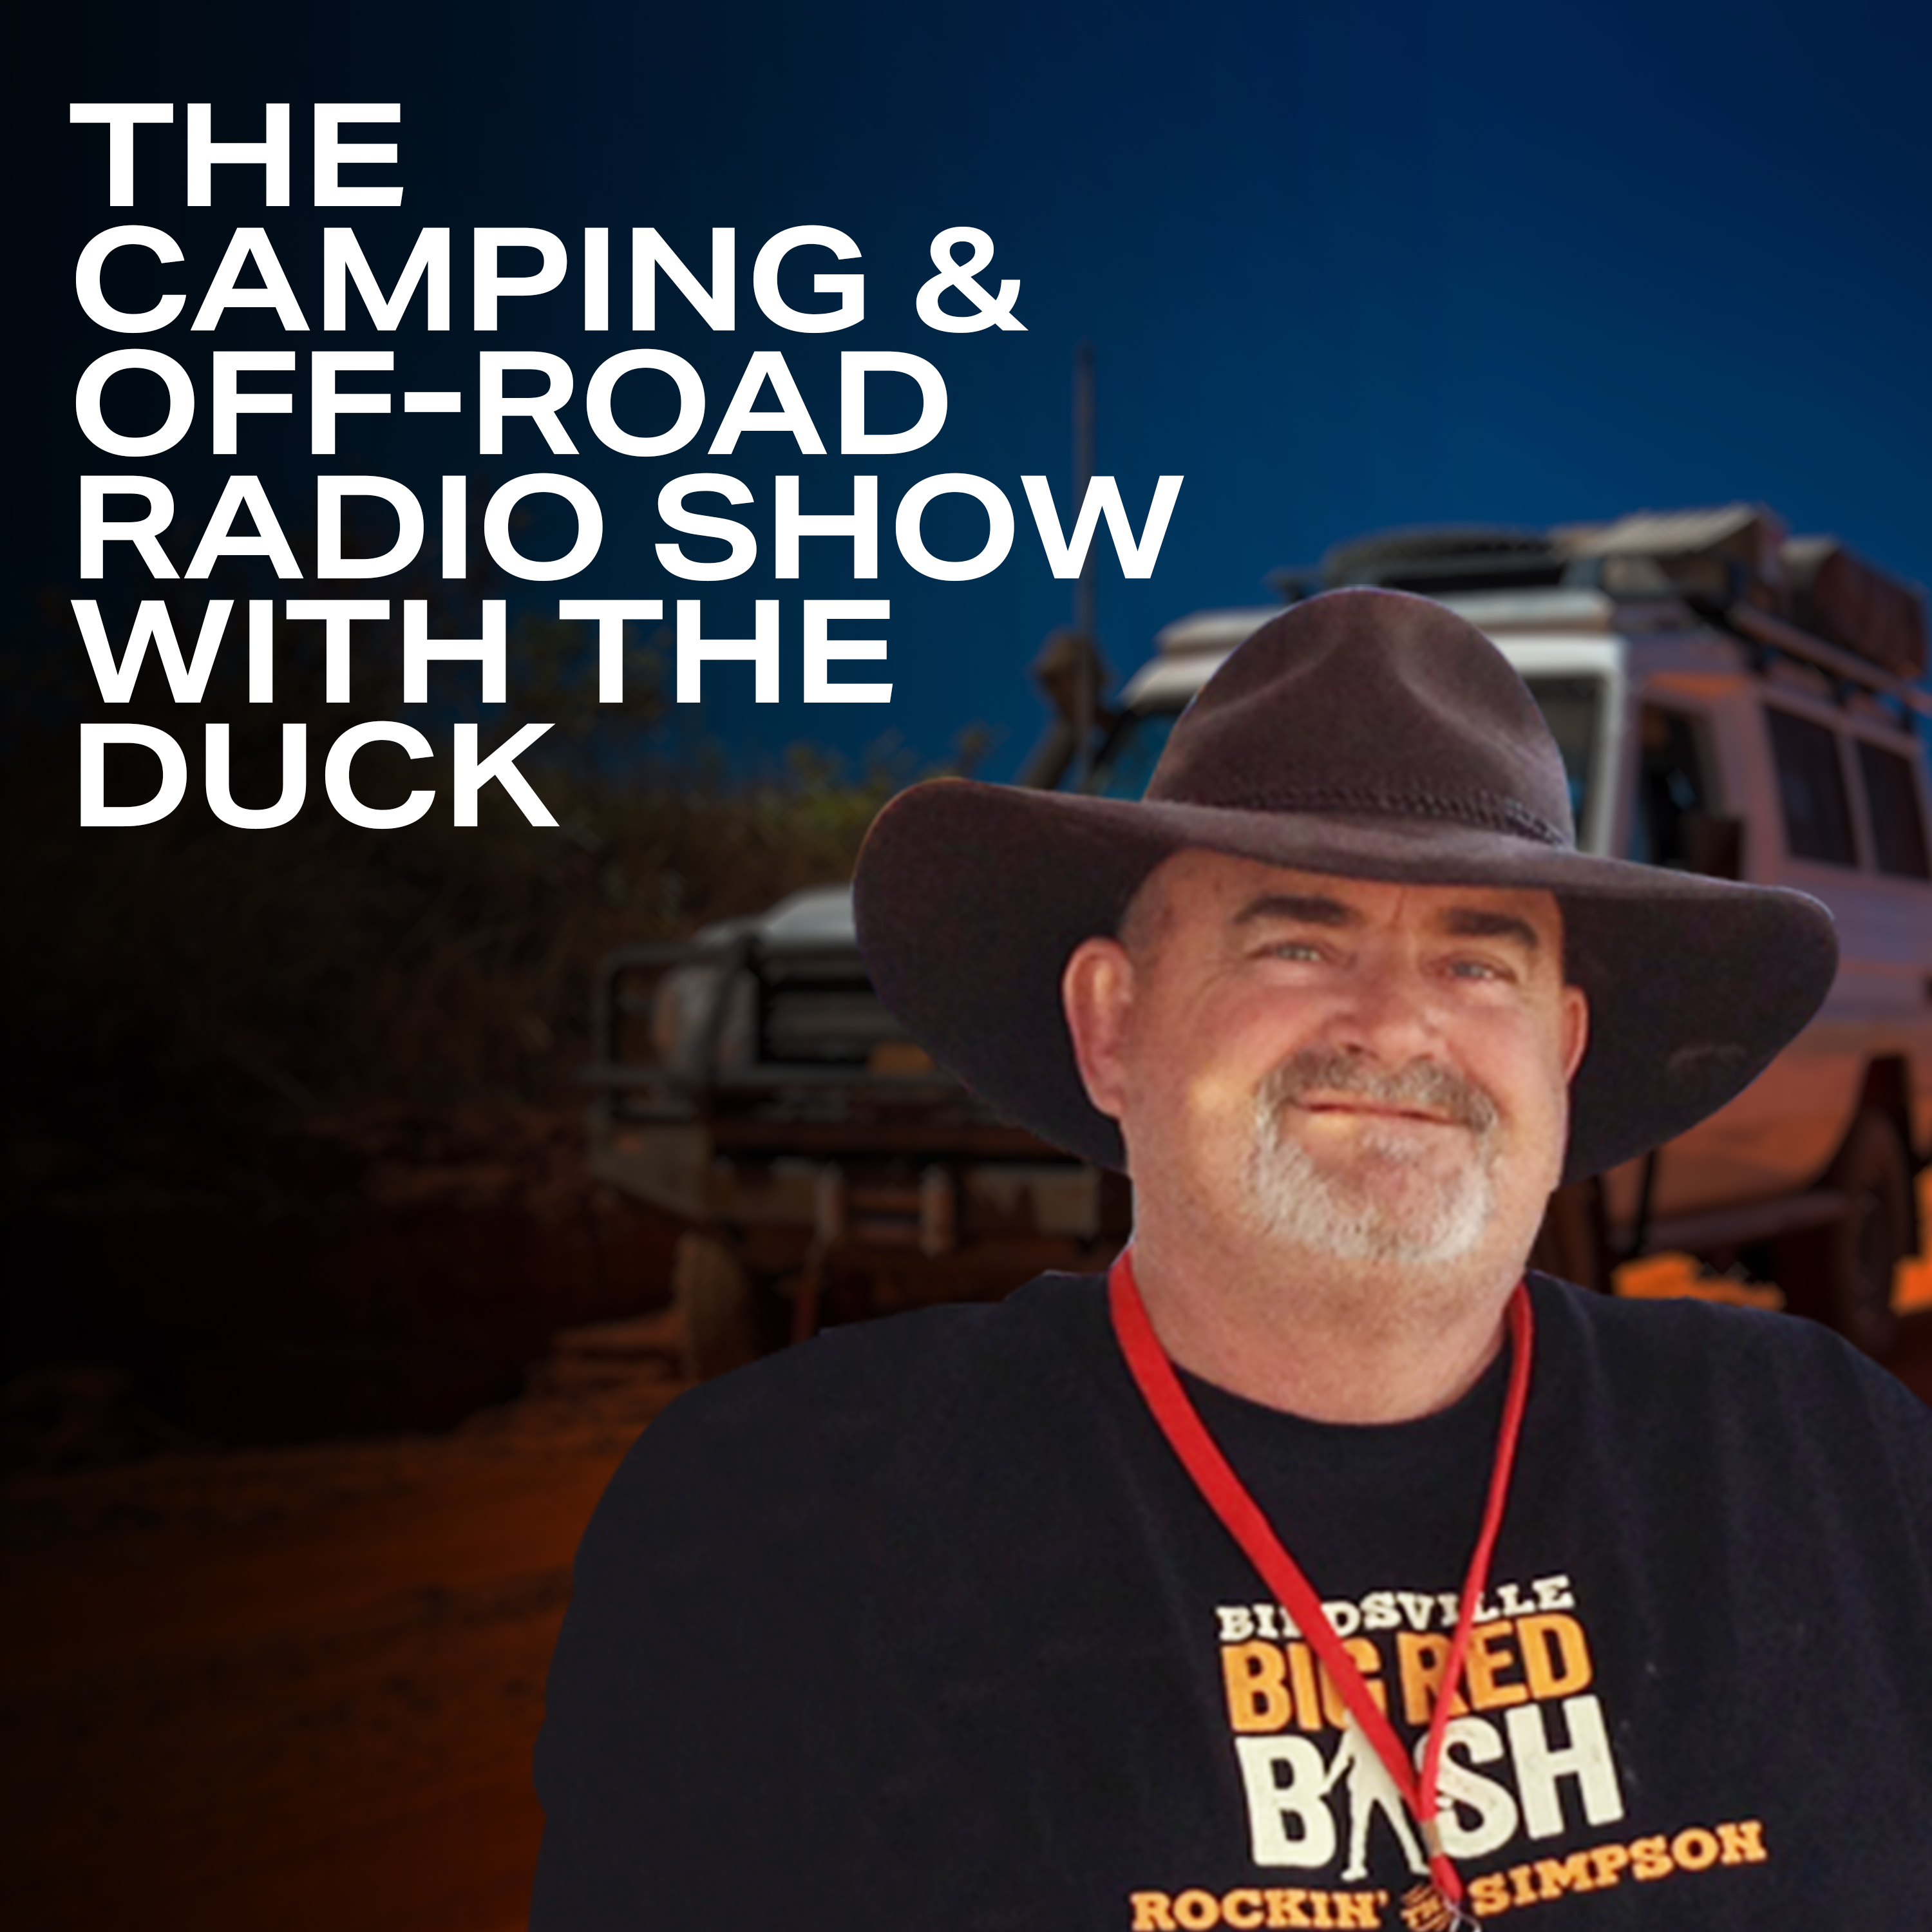 The Camping and Off-road Radio Show, Full Podcast, February 11th